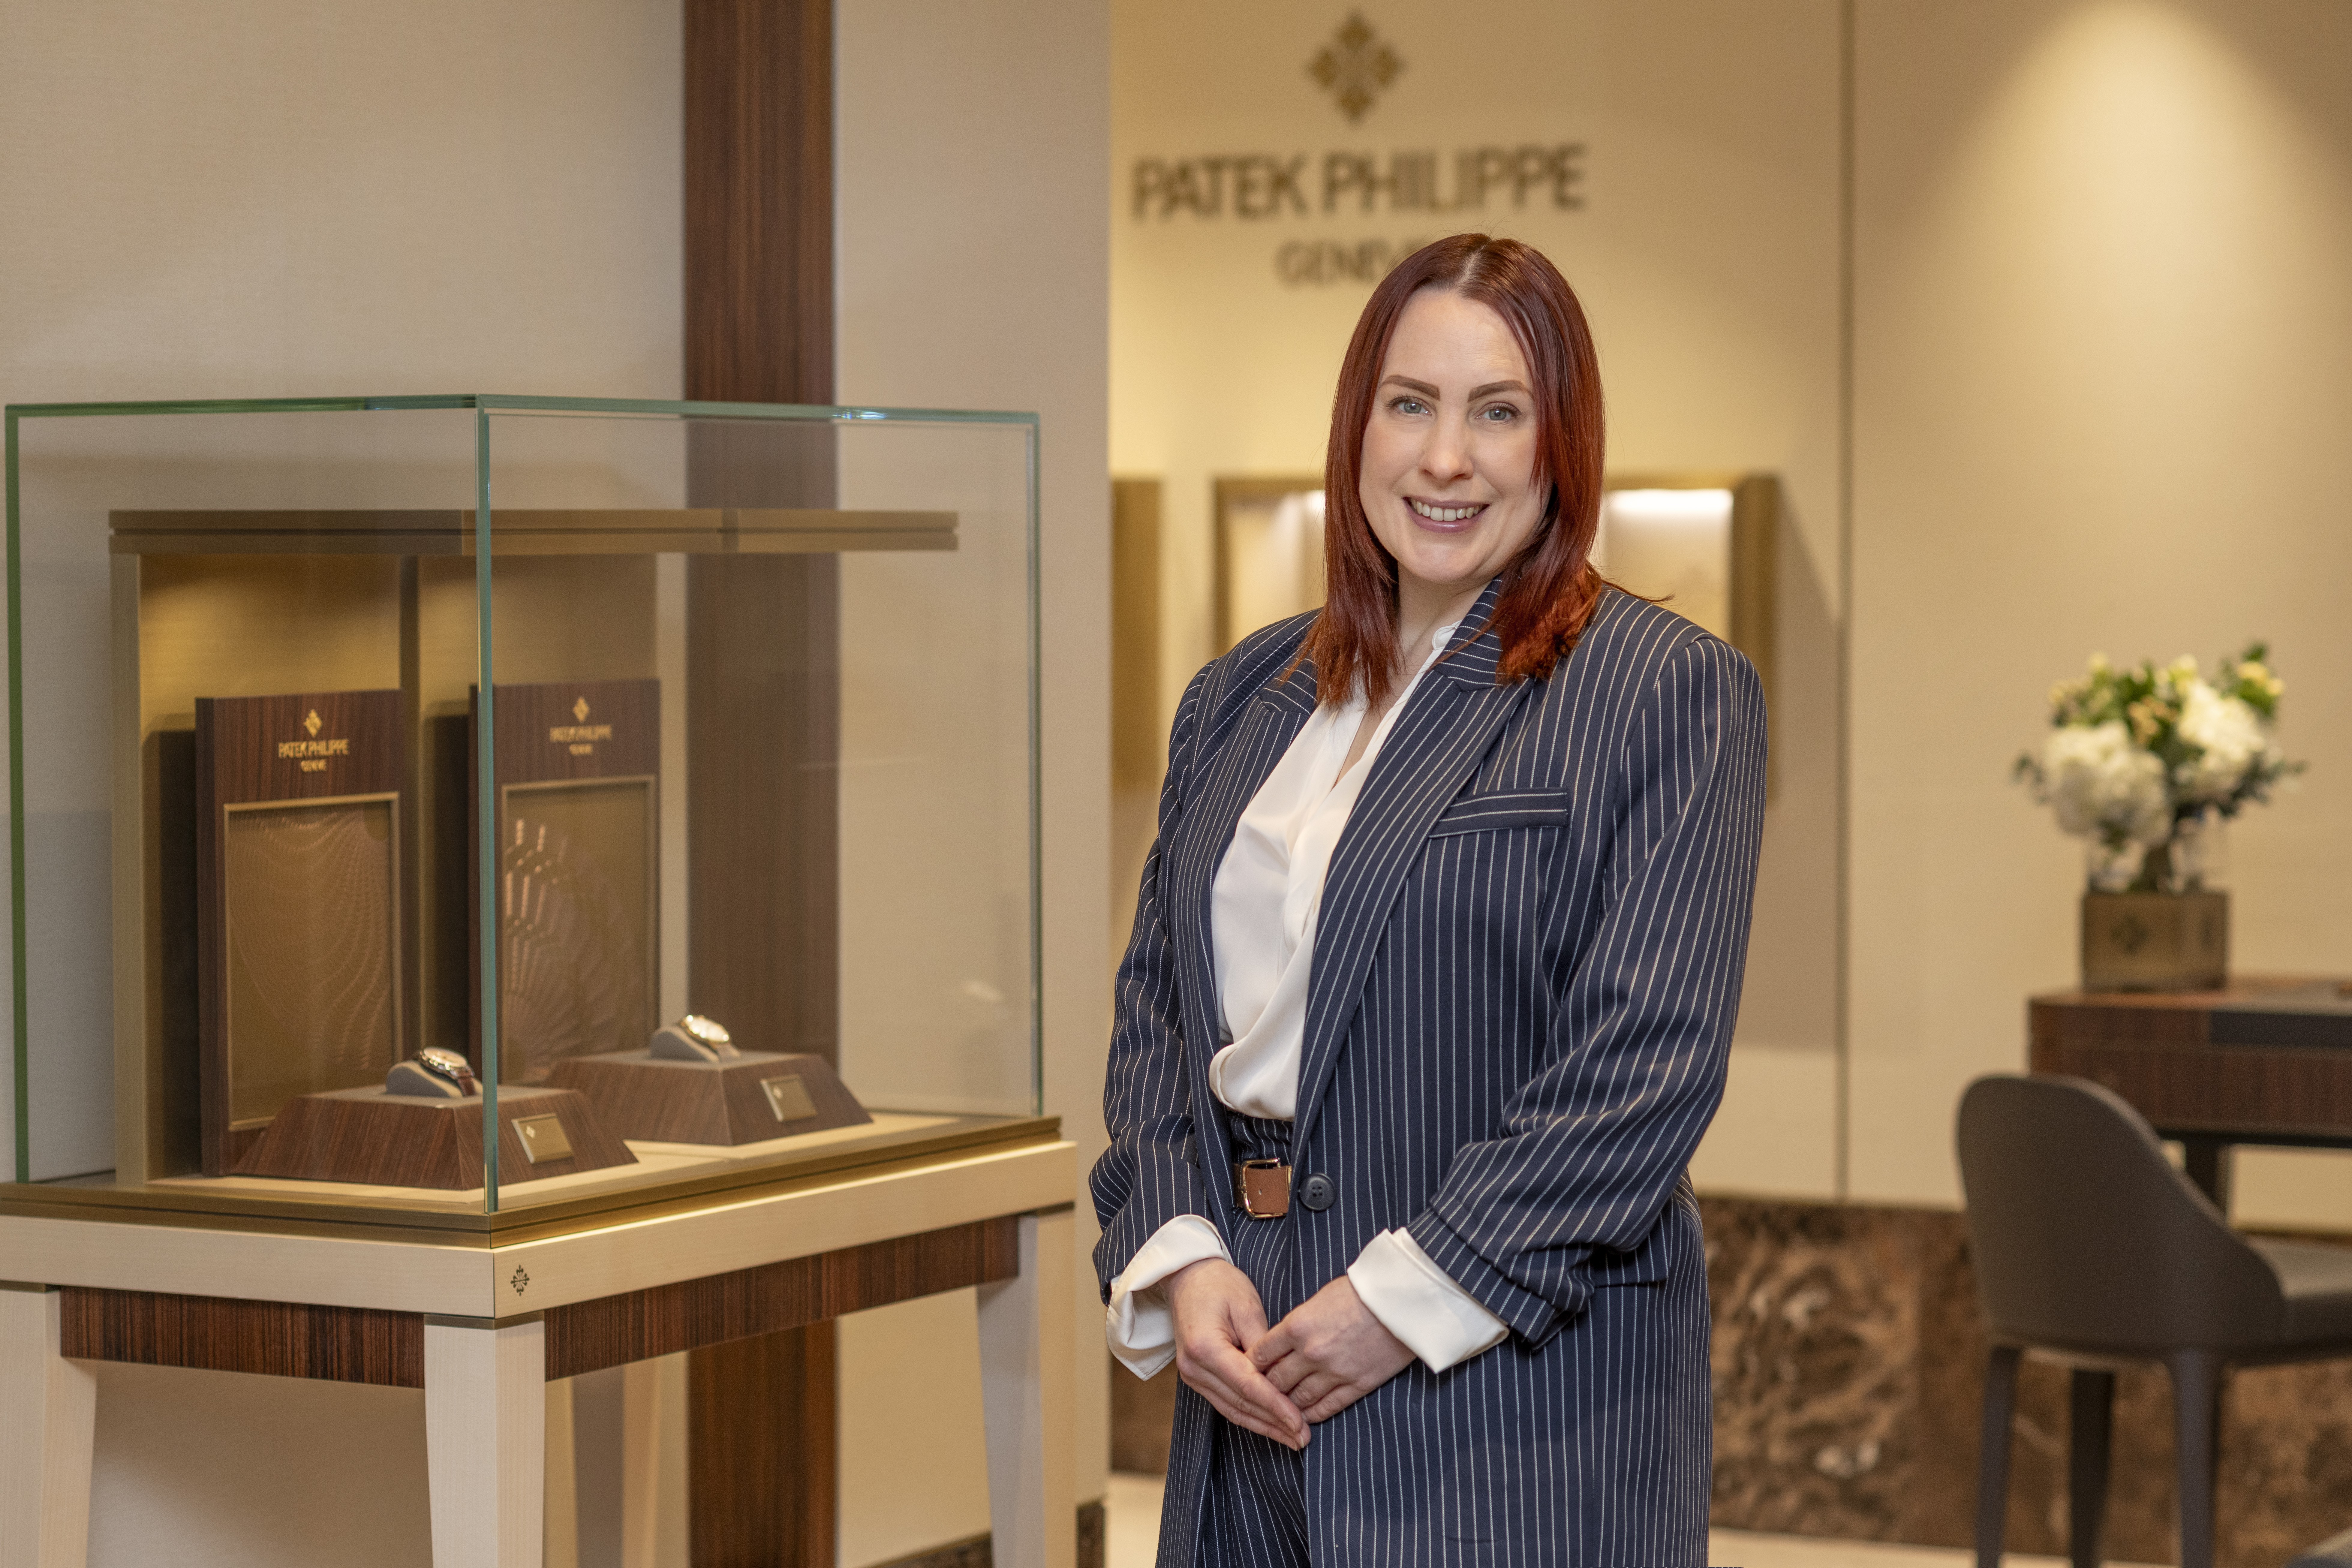 Patek Philippe at Prestons Norwich - An Interview with Donna McGillivray